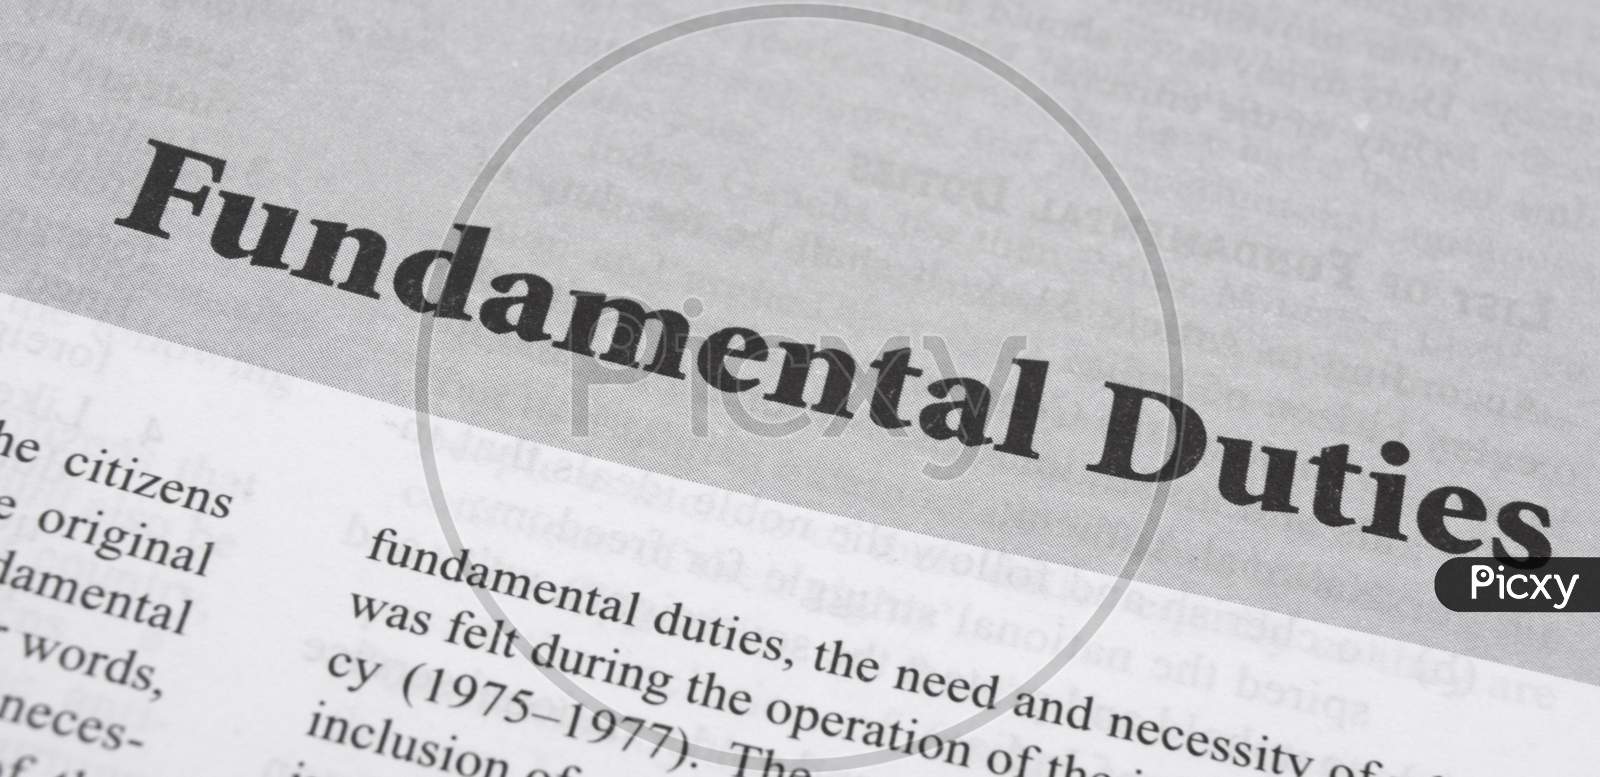 Fundamental Duties Printed In Book With Large Letters.